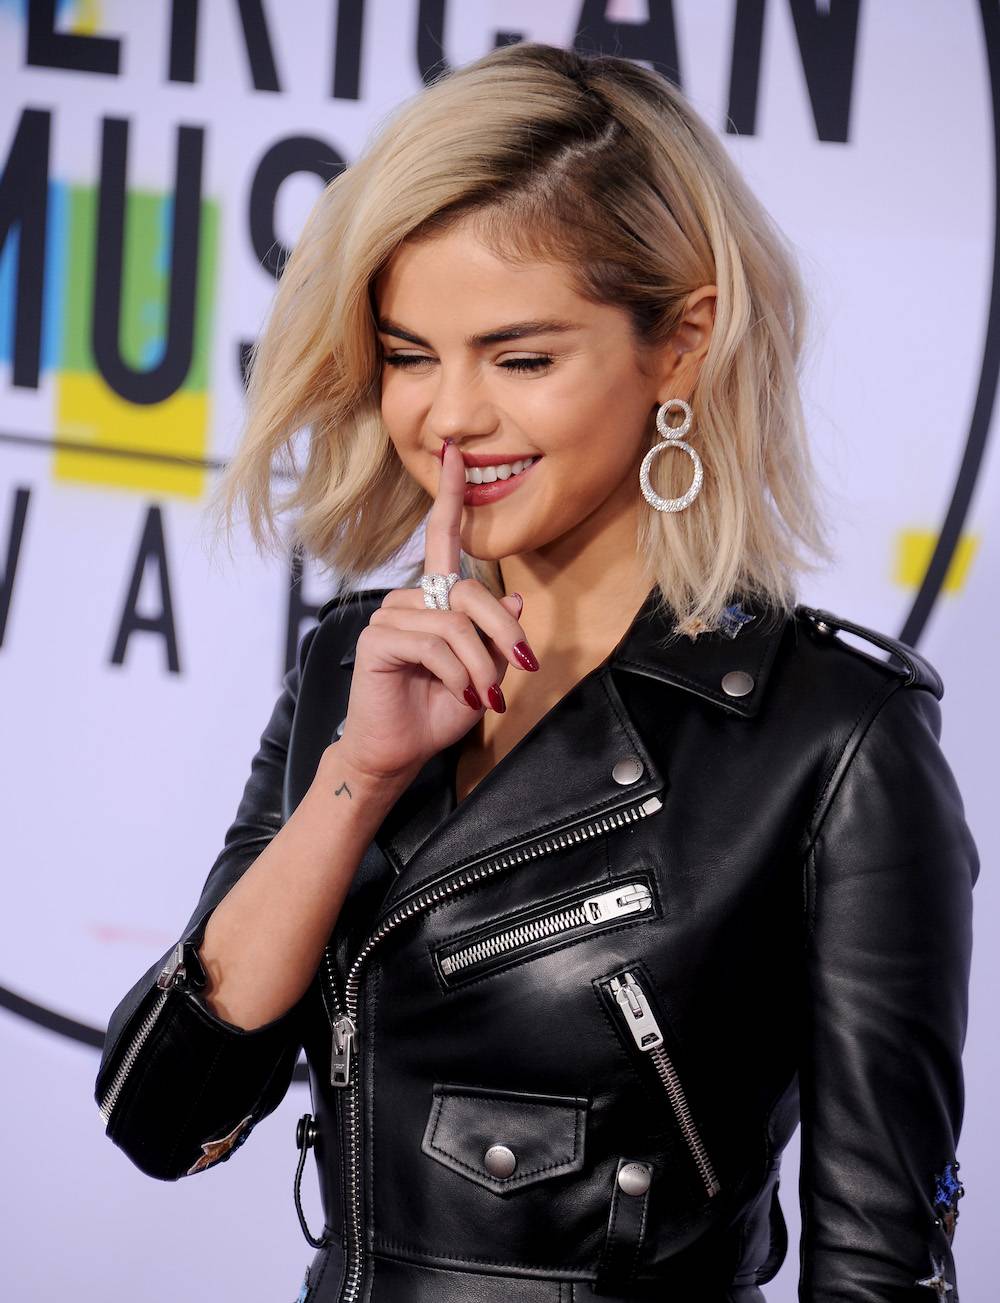 Na gali American Music Awards (Fot. Getty Images)